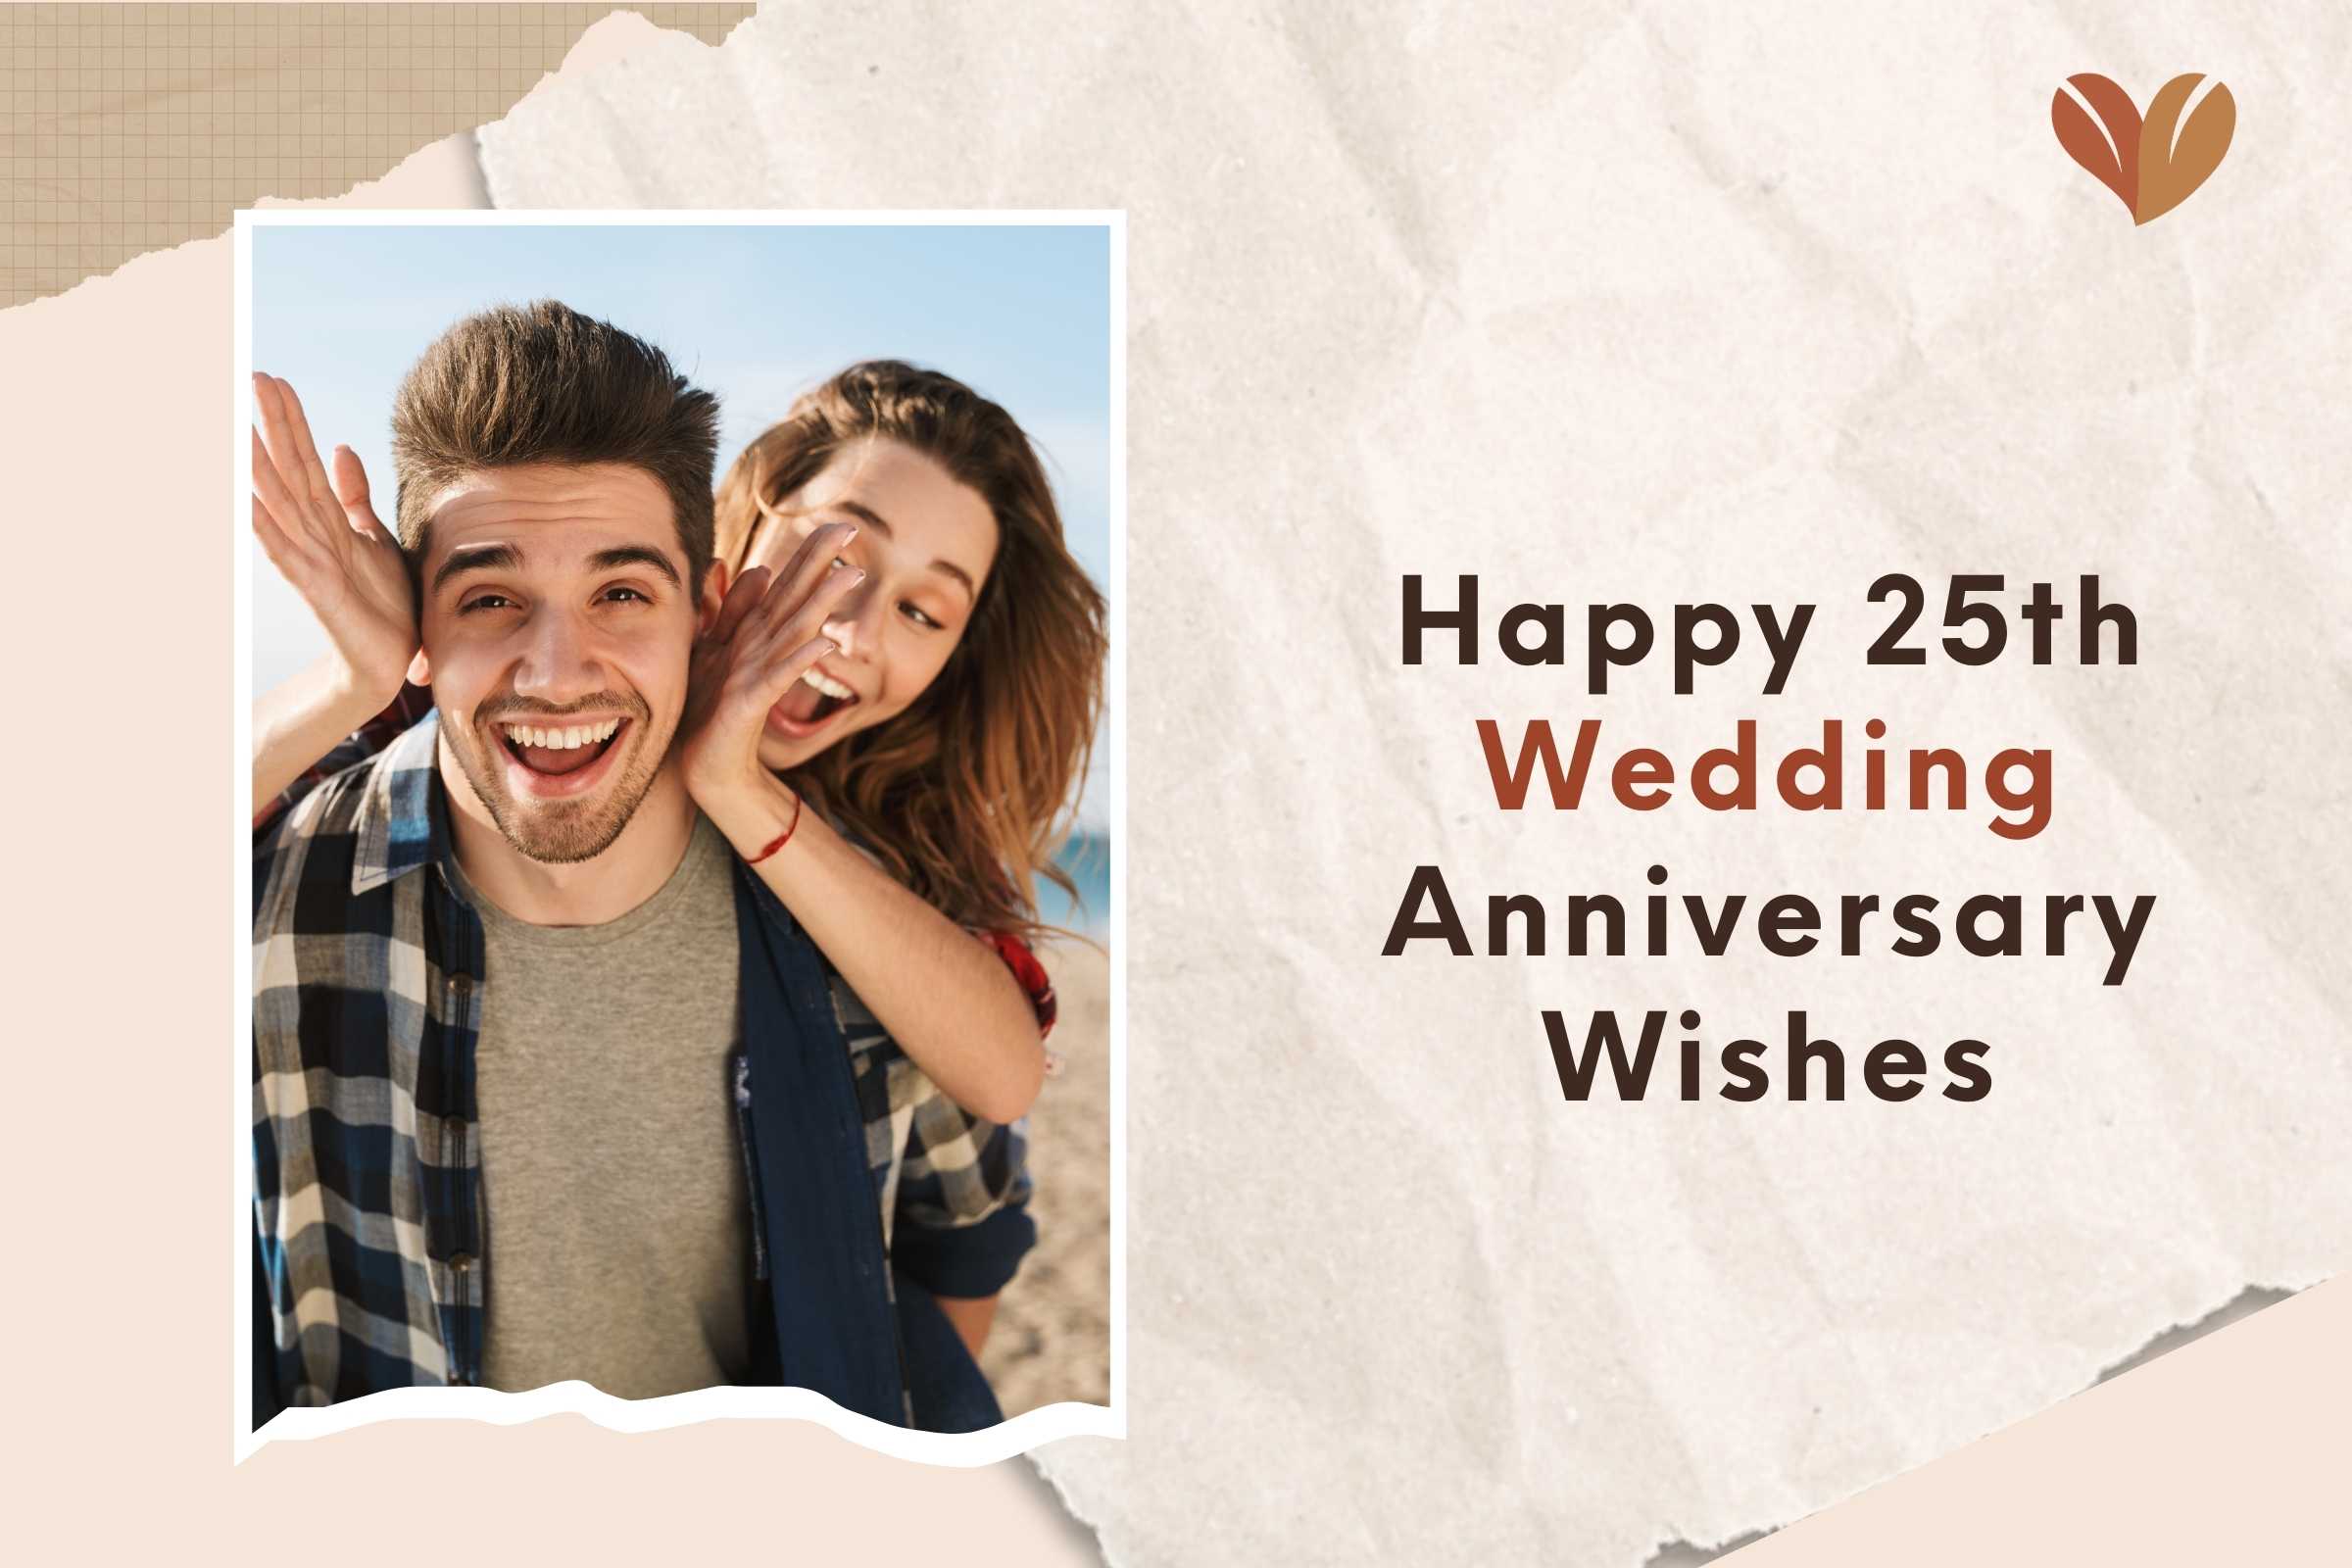 Happy 25th Wedding Anniversary Wishes And Messages